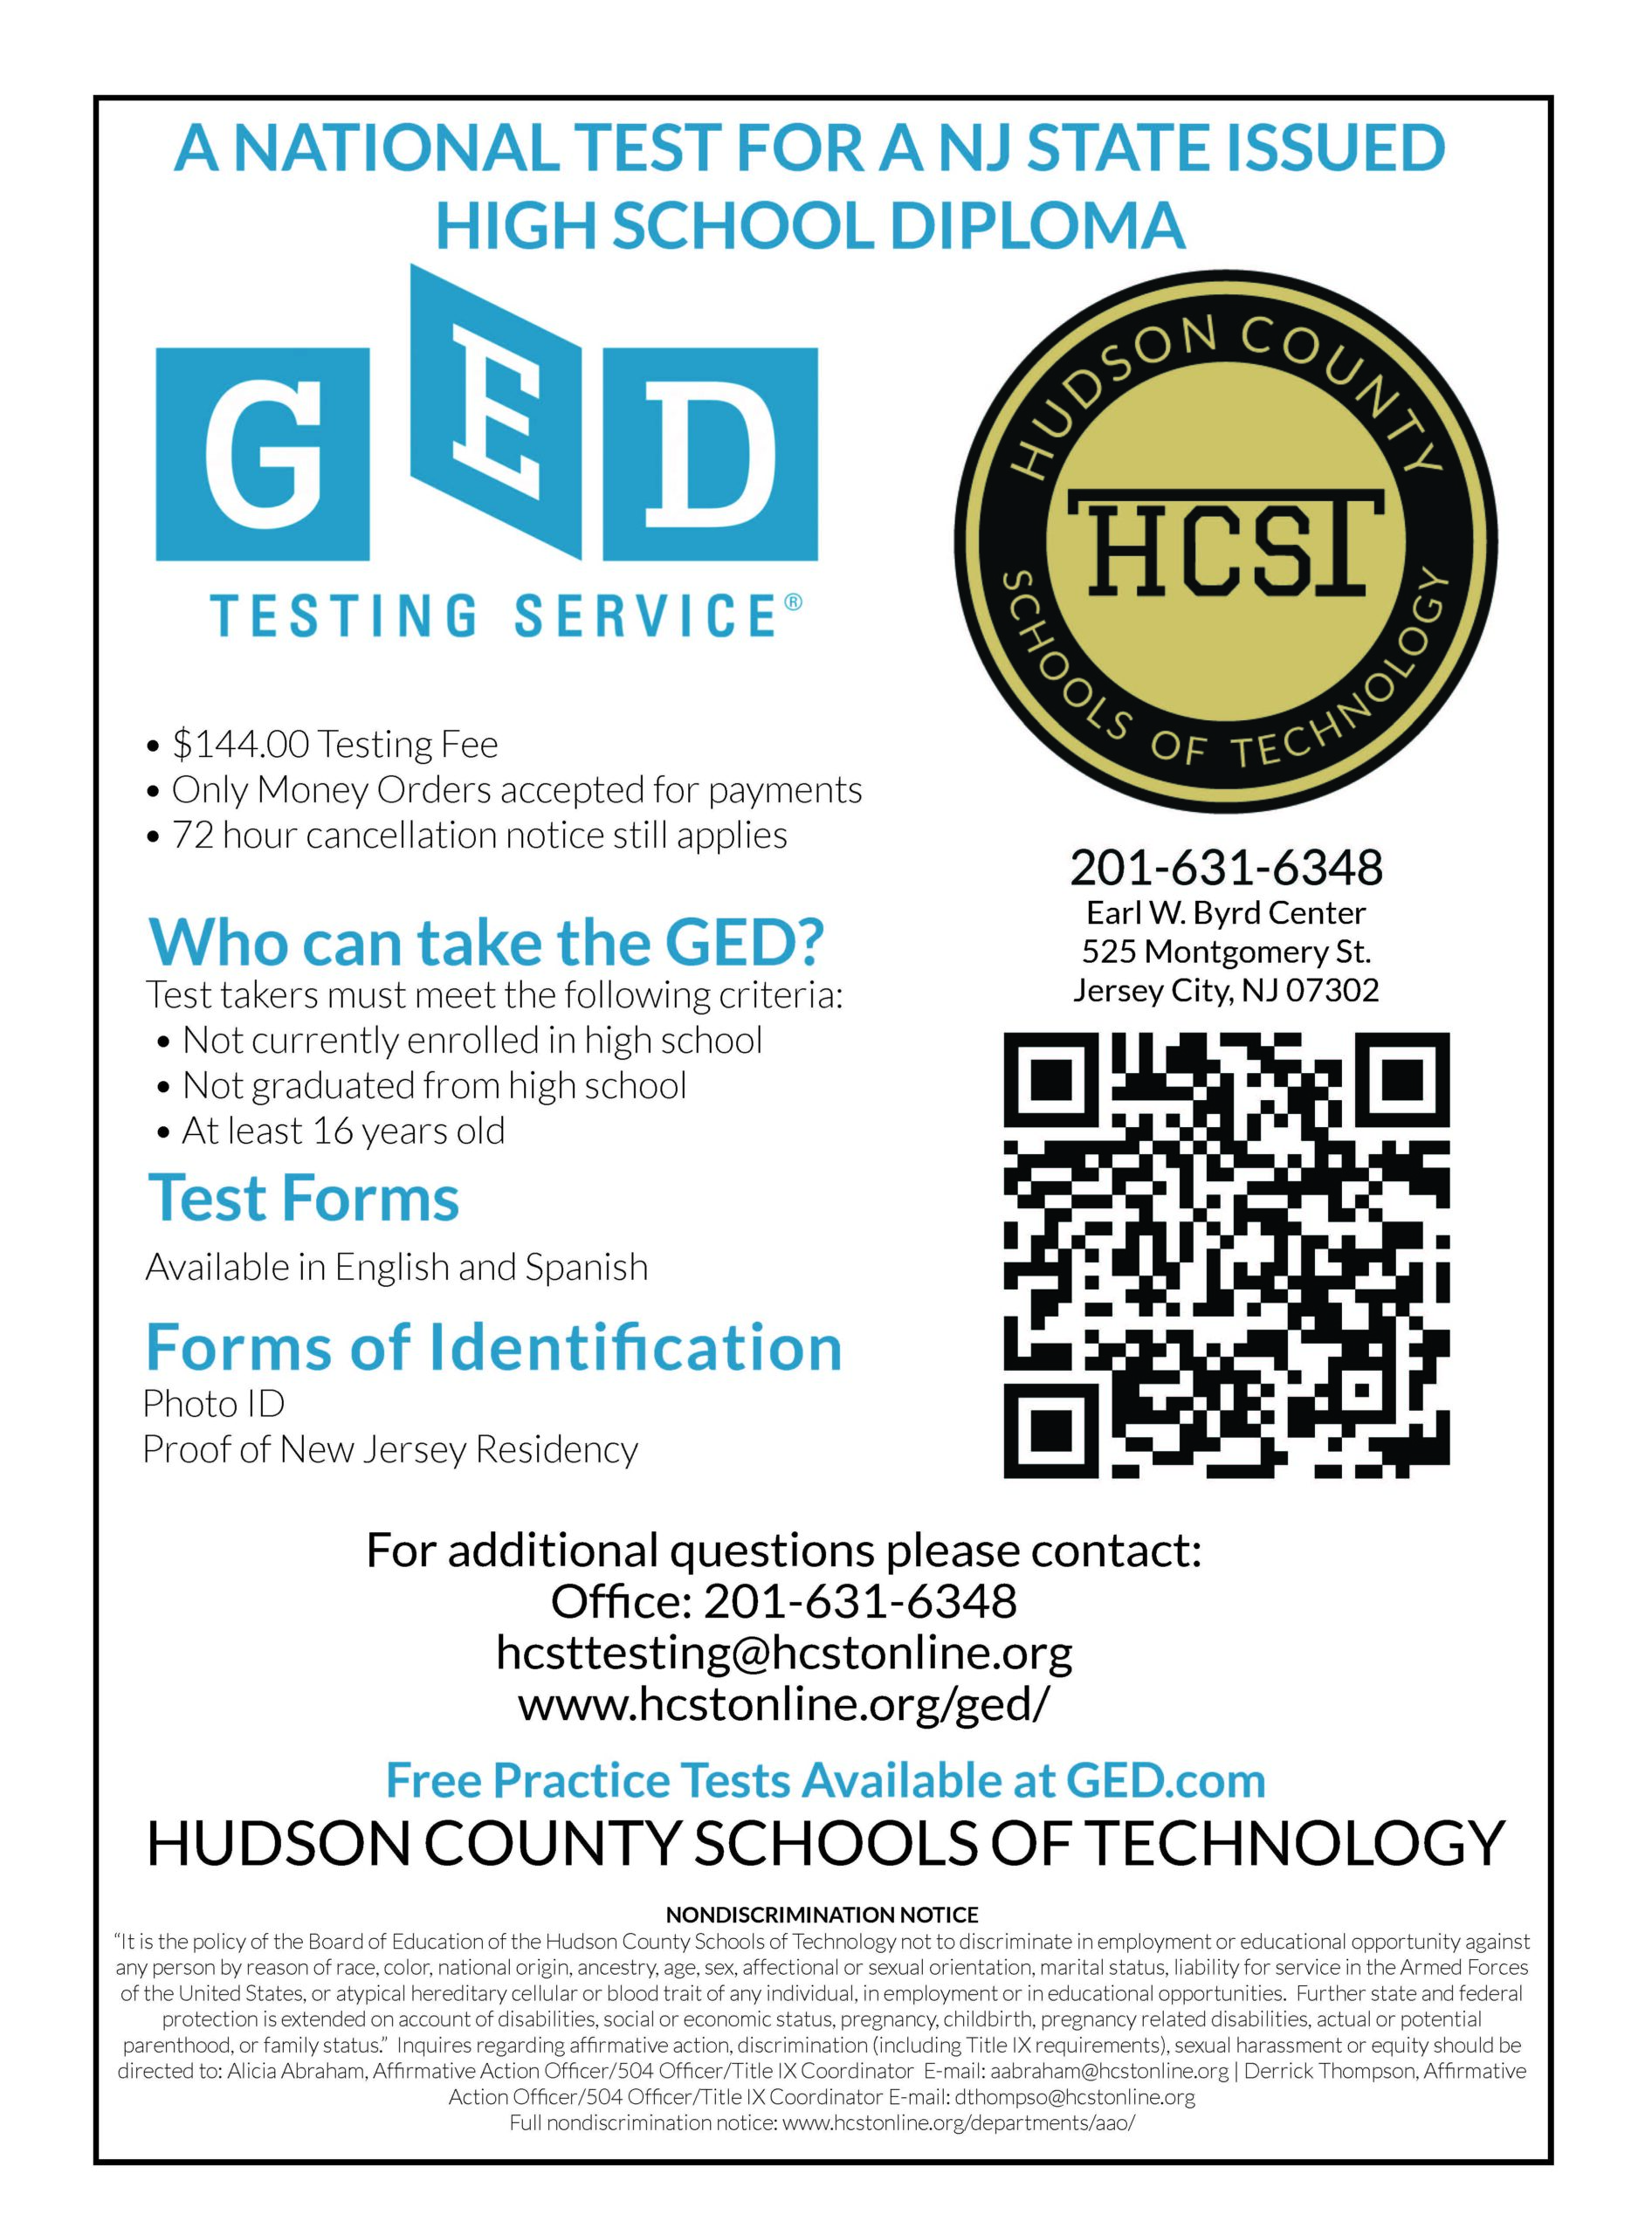 Click the GED flyer to register